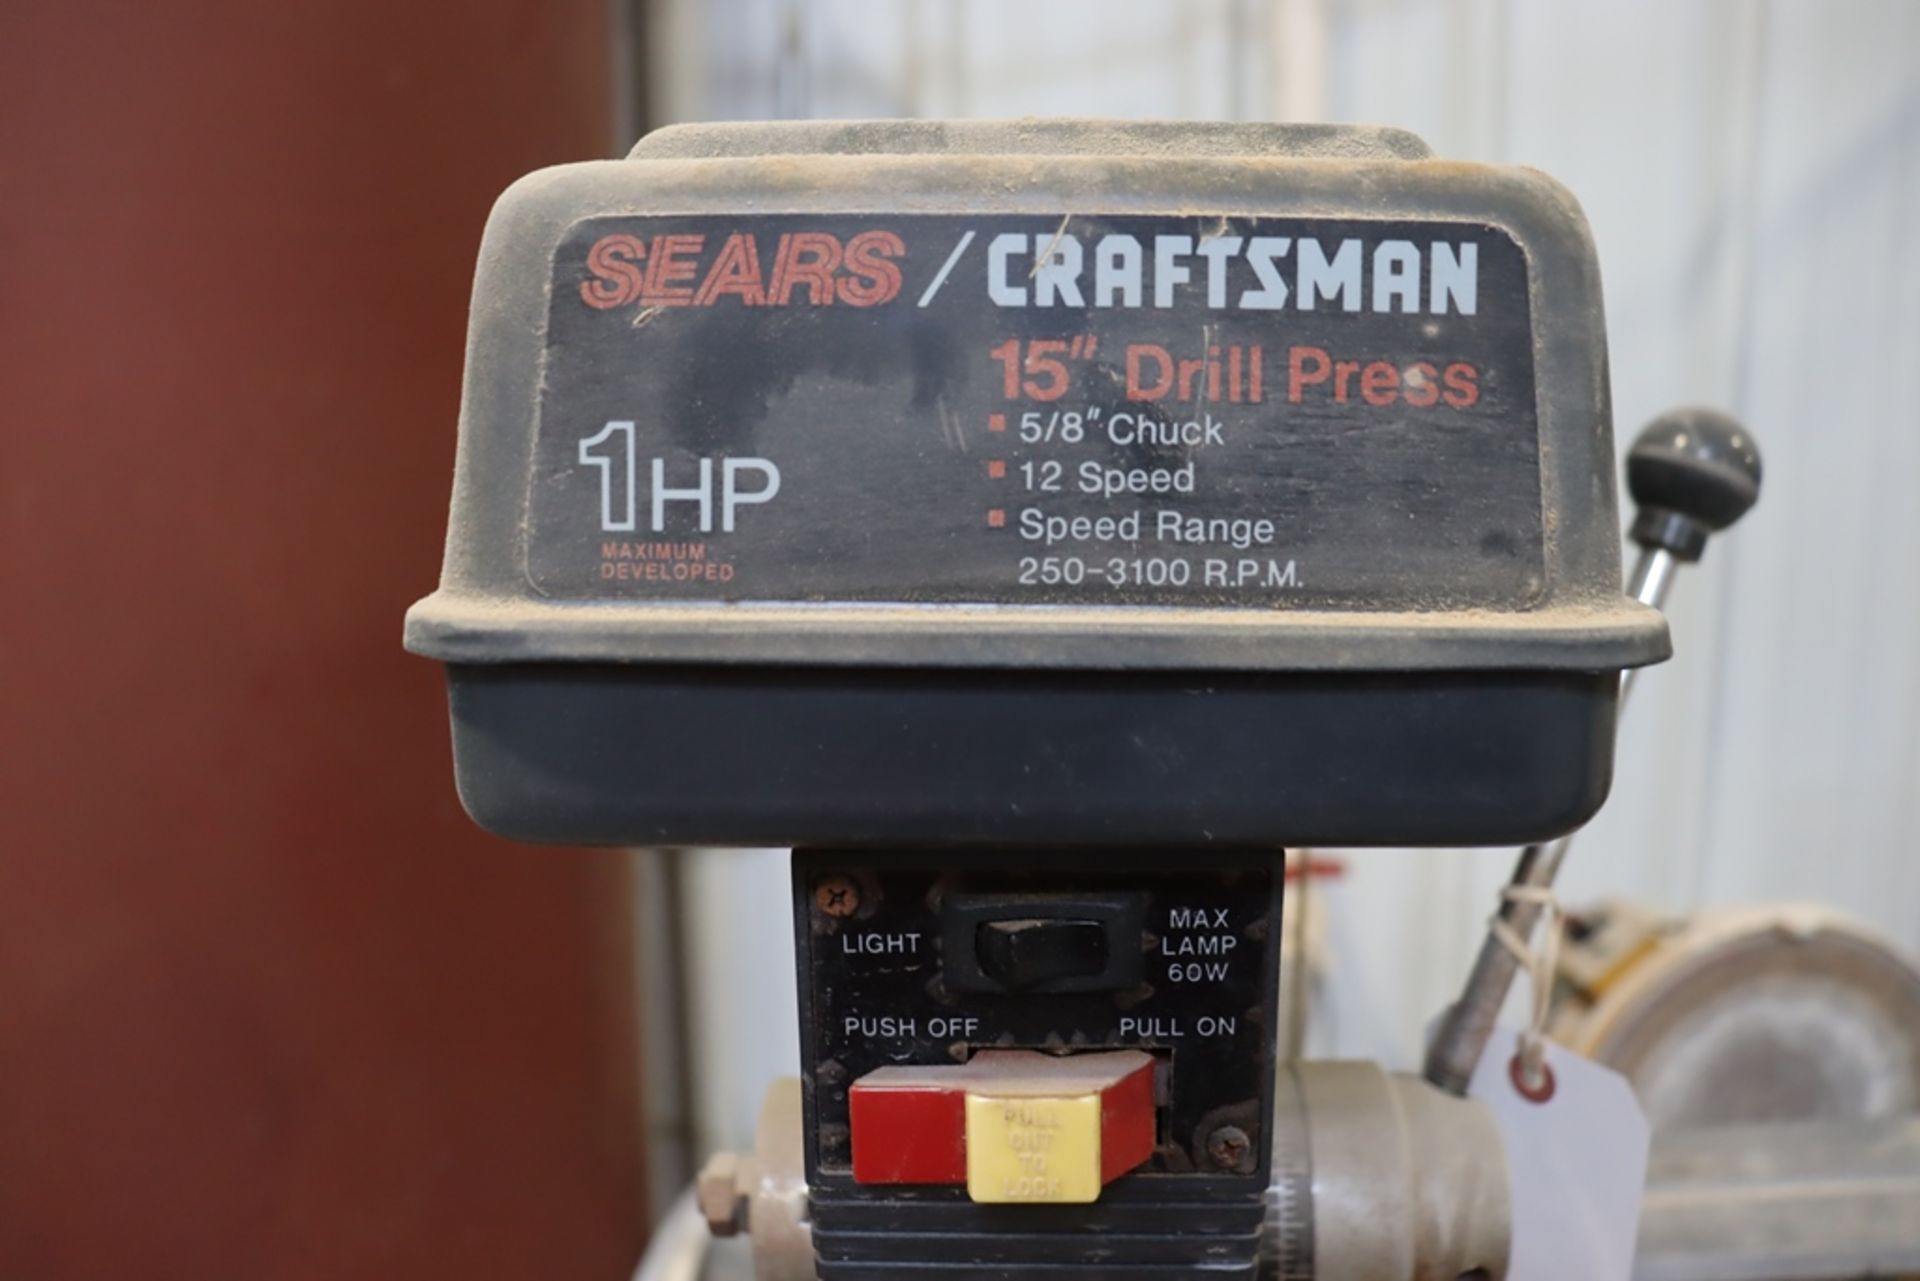 Craftsman 1HP floor mount drill press with 12" drilling table - Image 4 of 4